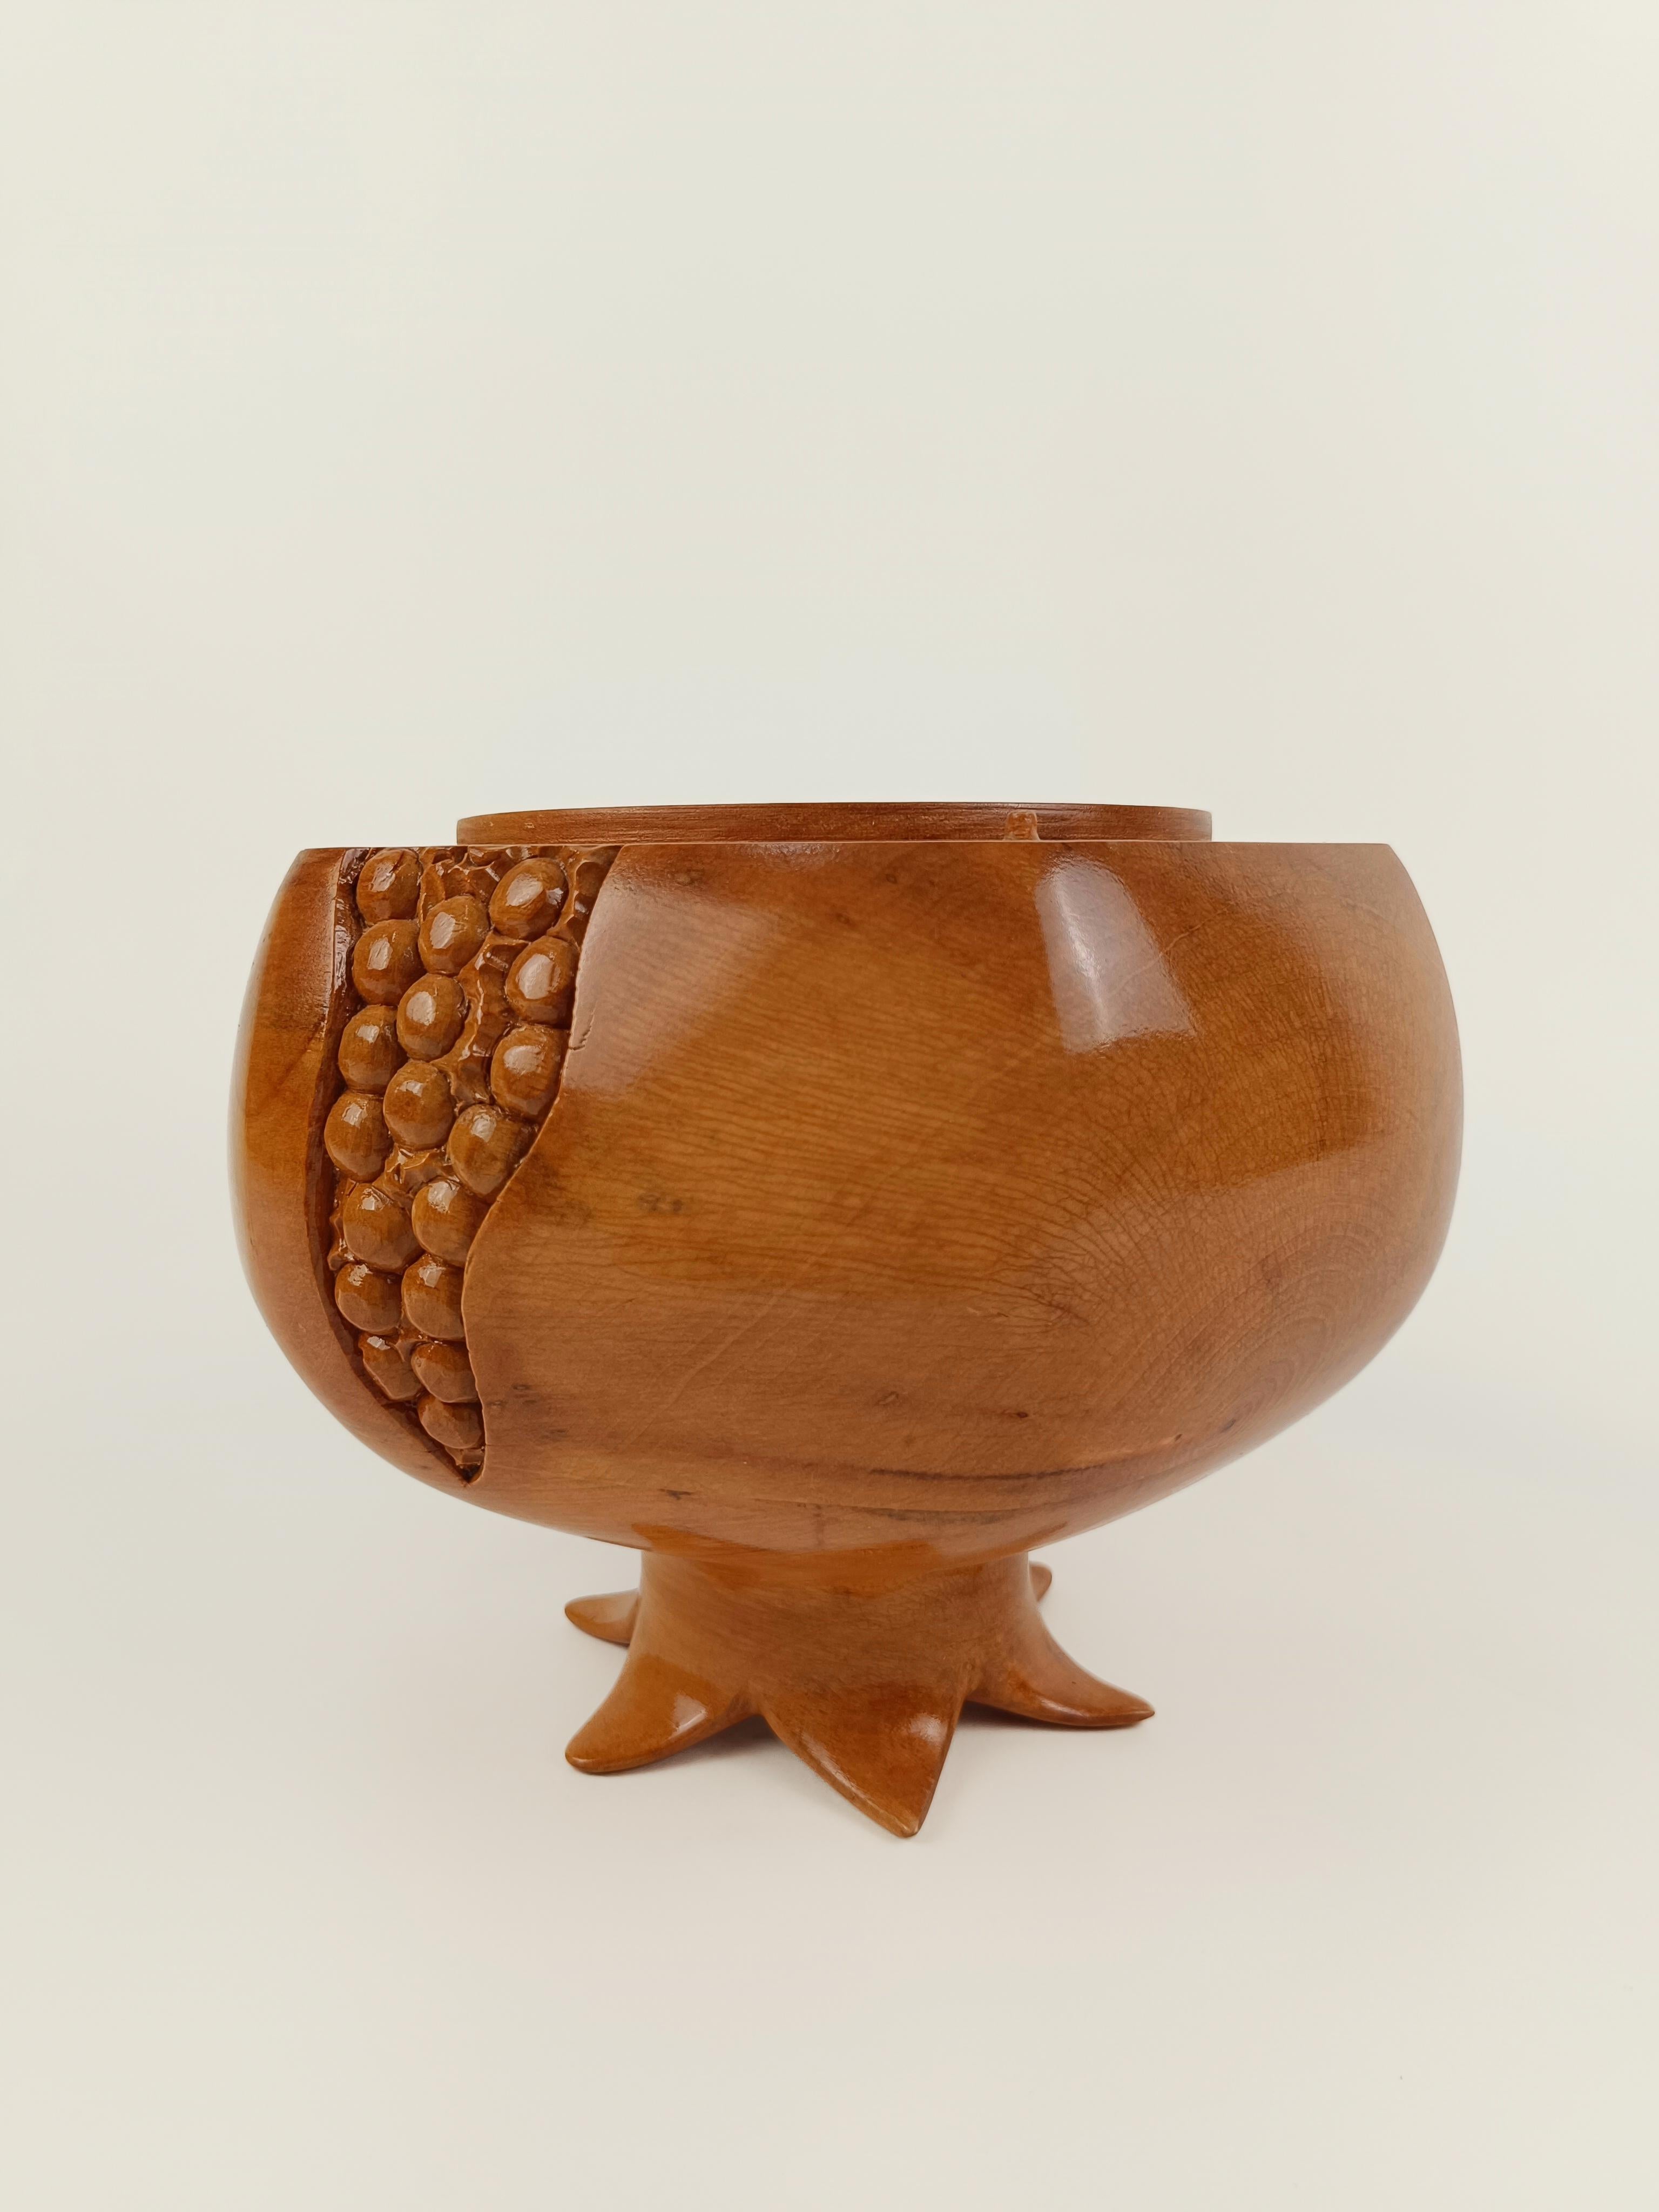 Sculptural Vintage Ice Bucket in maple wood carved in the shape of a pomegranate For Sale 3